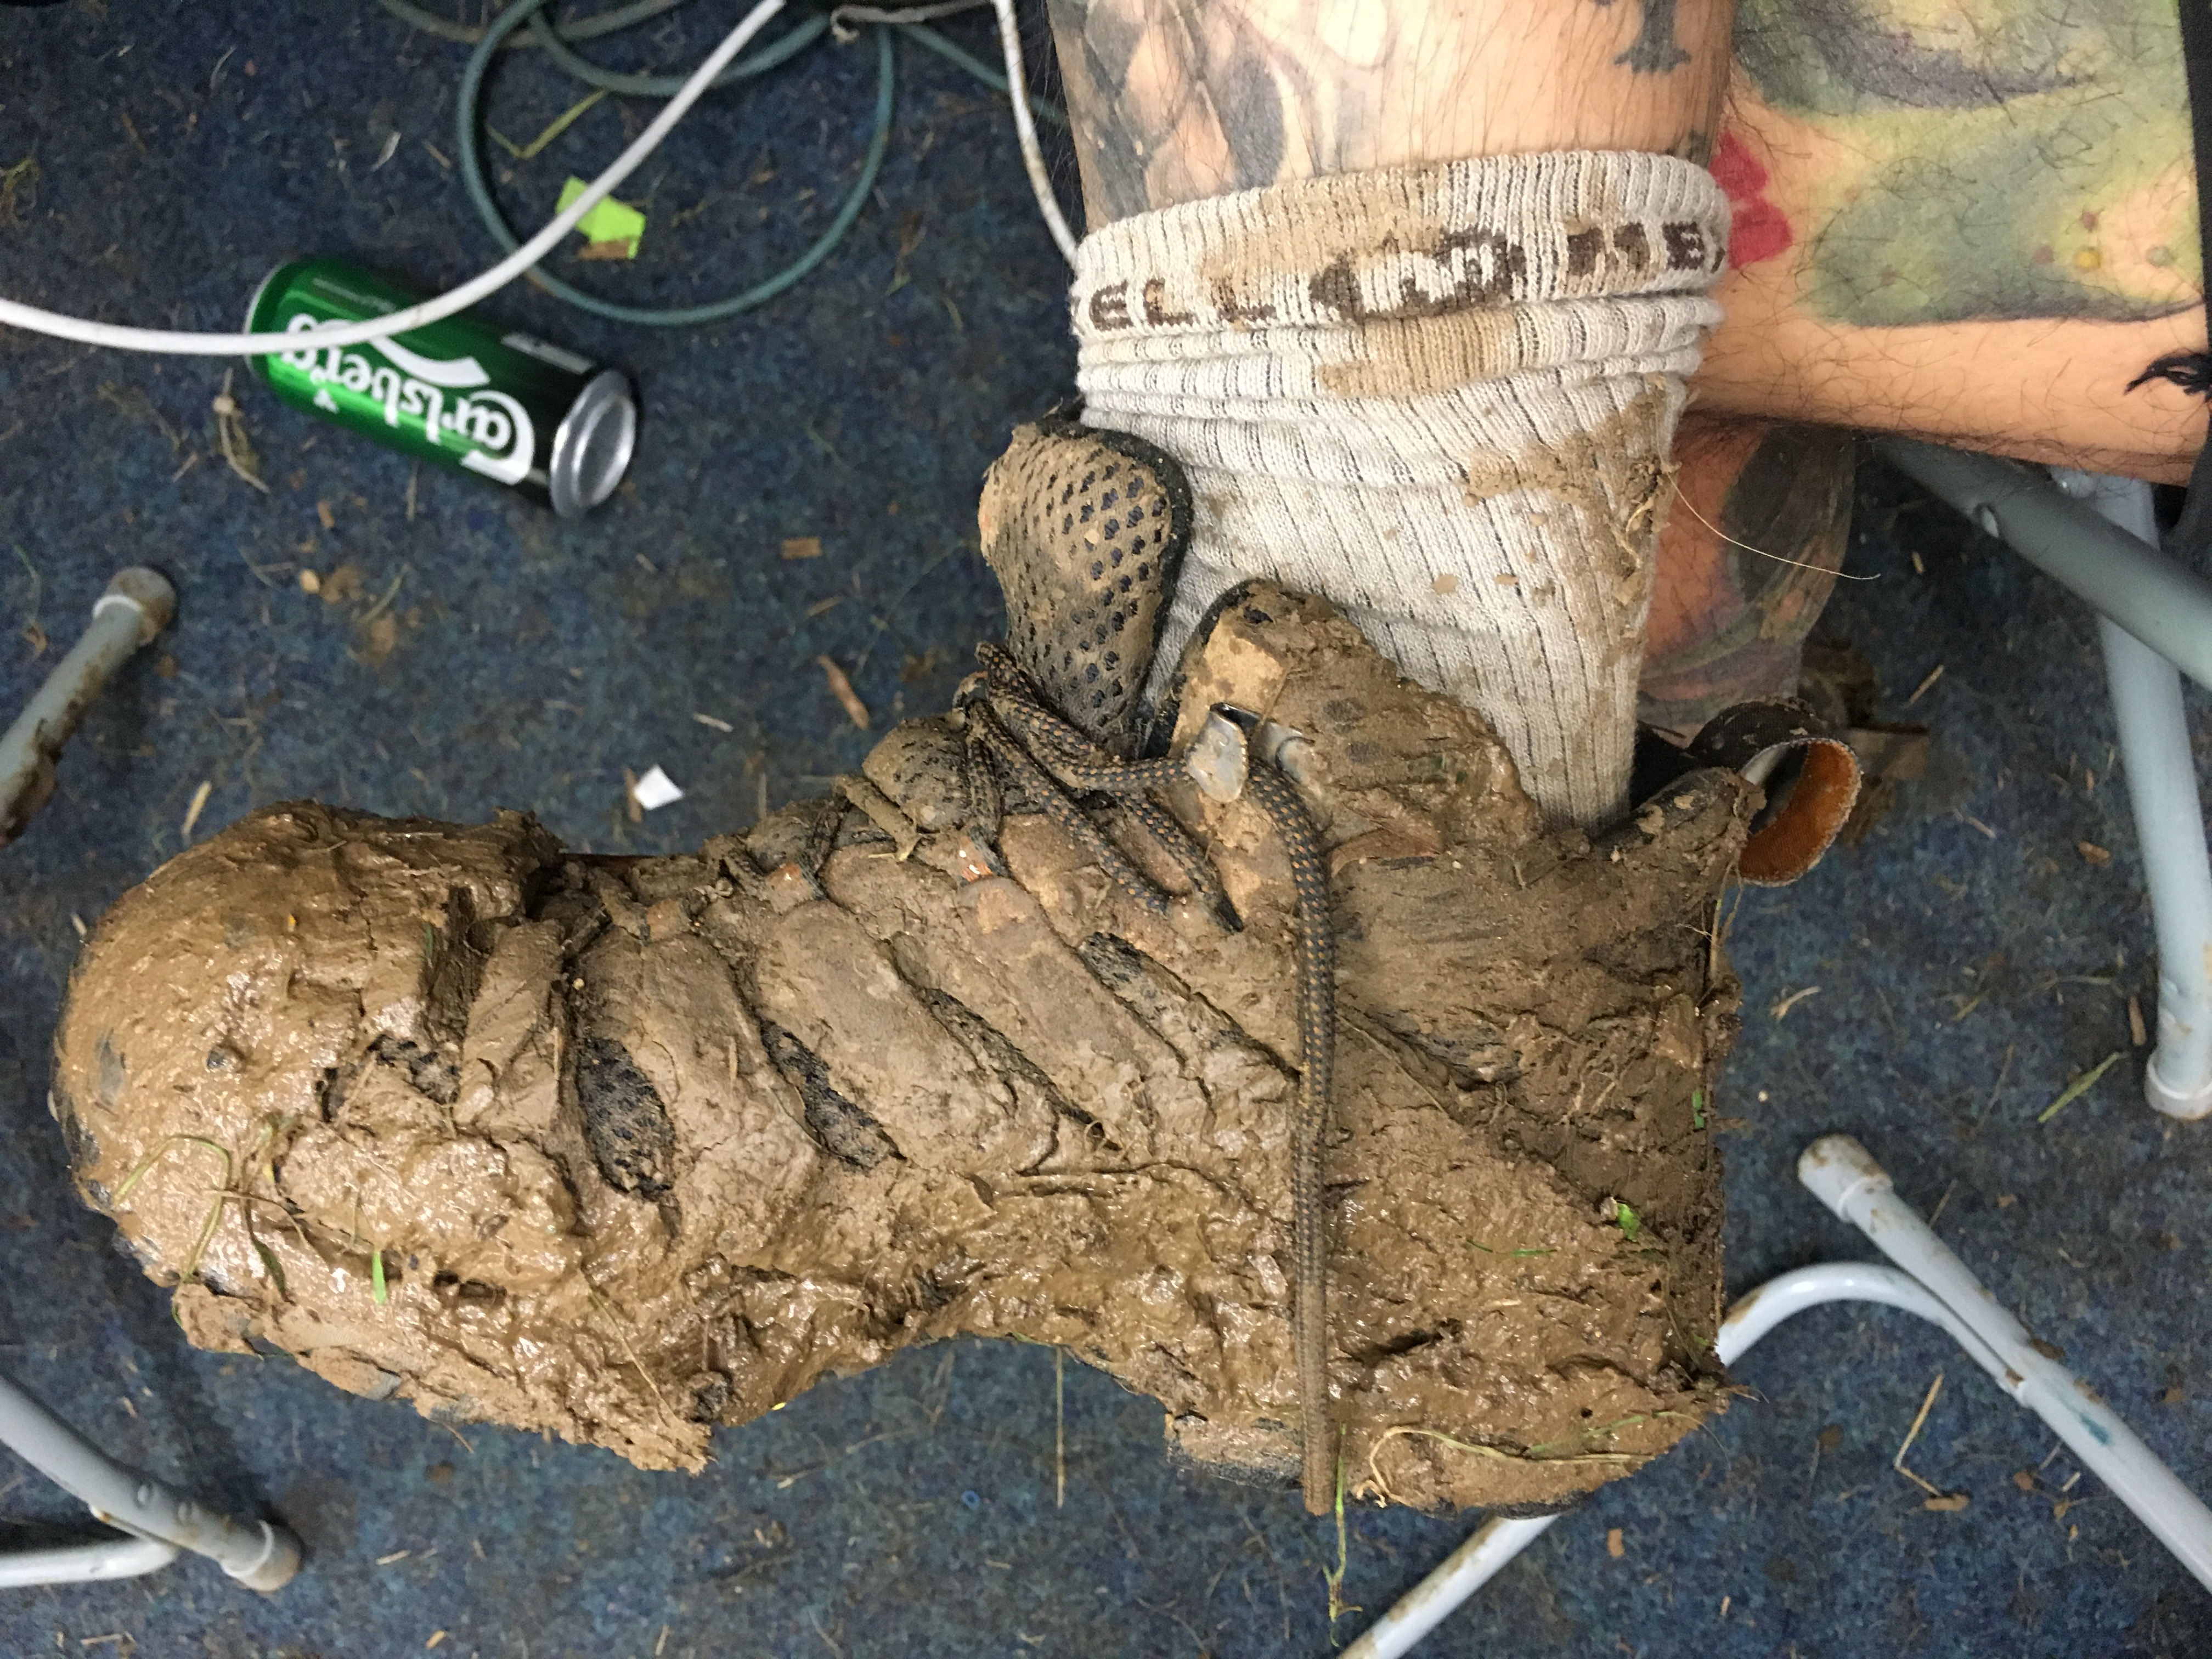 My mud with my shoe